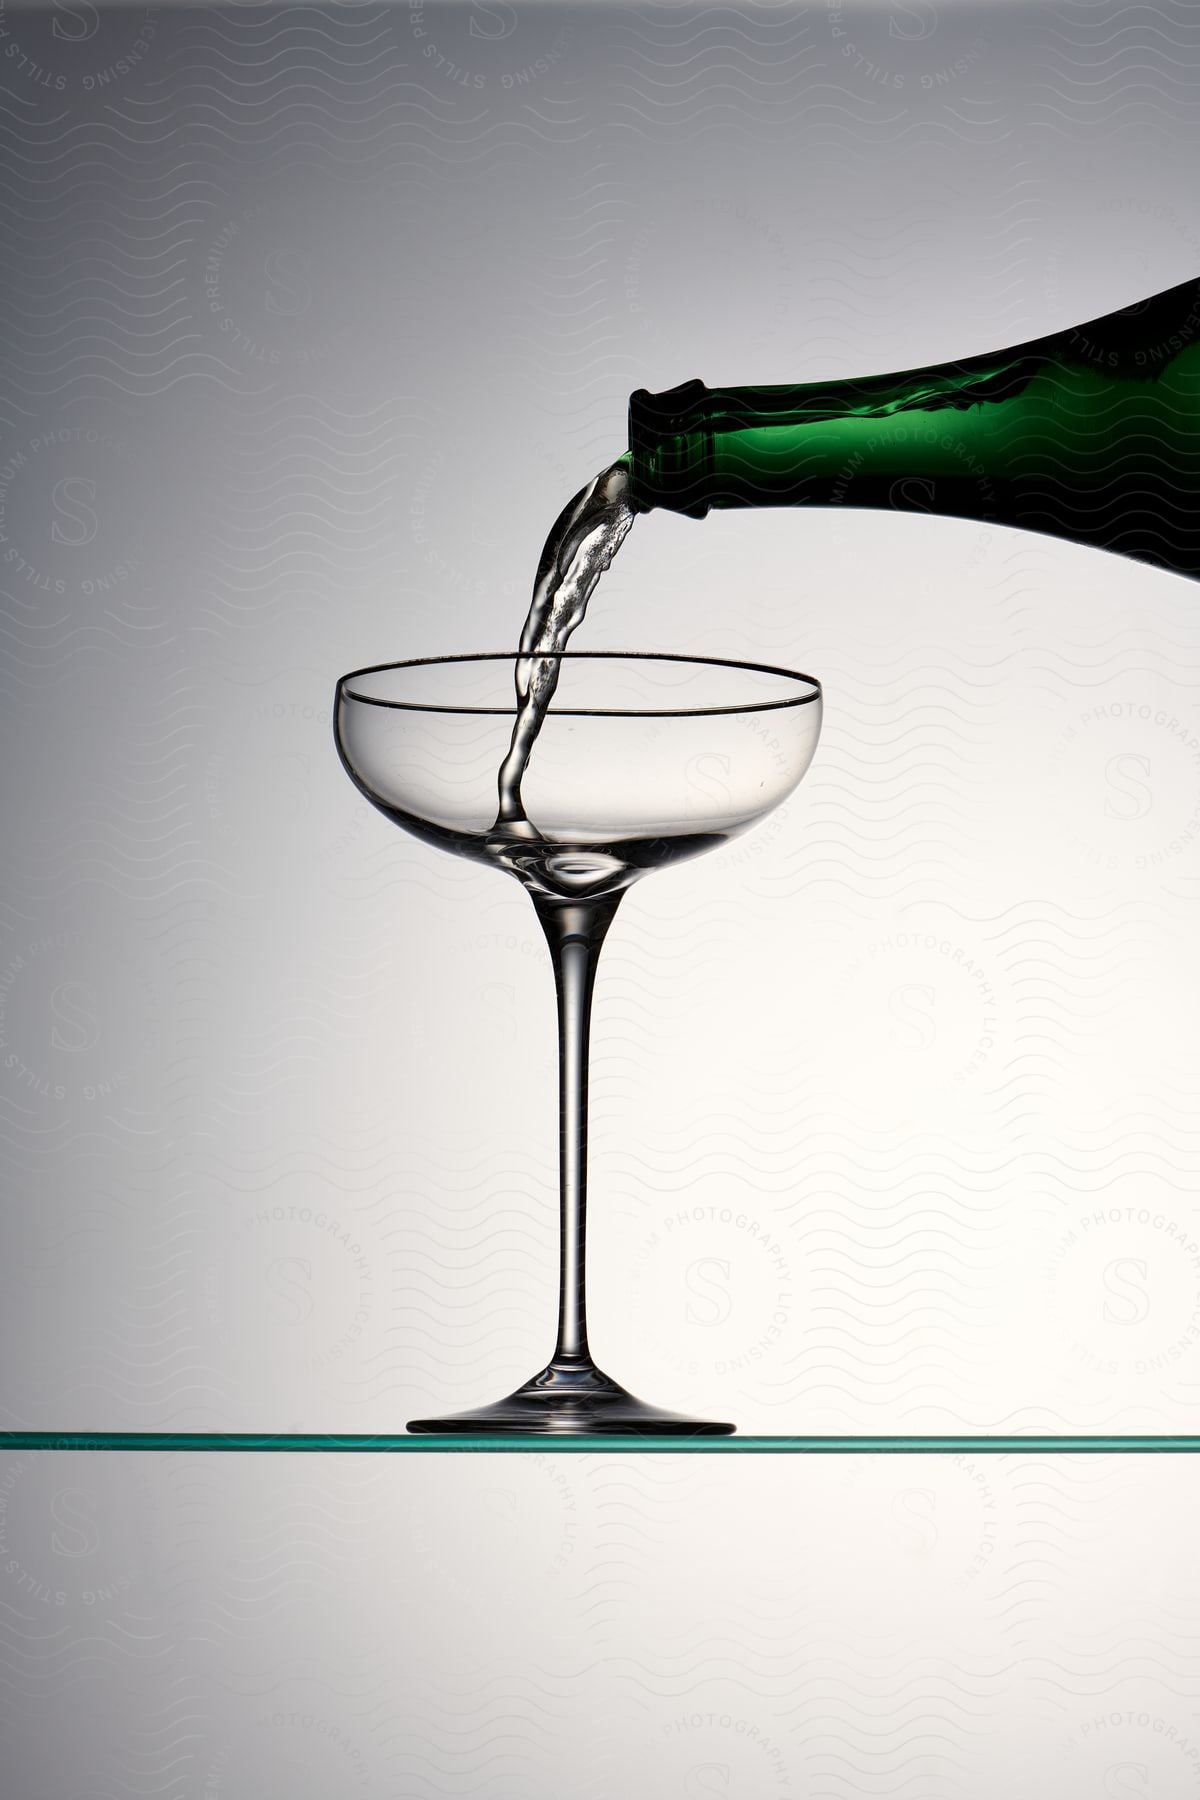 Liquid being poured from a green bottle into a martini glass on a clear surface with a gradient background.